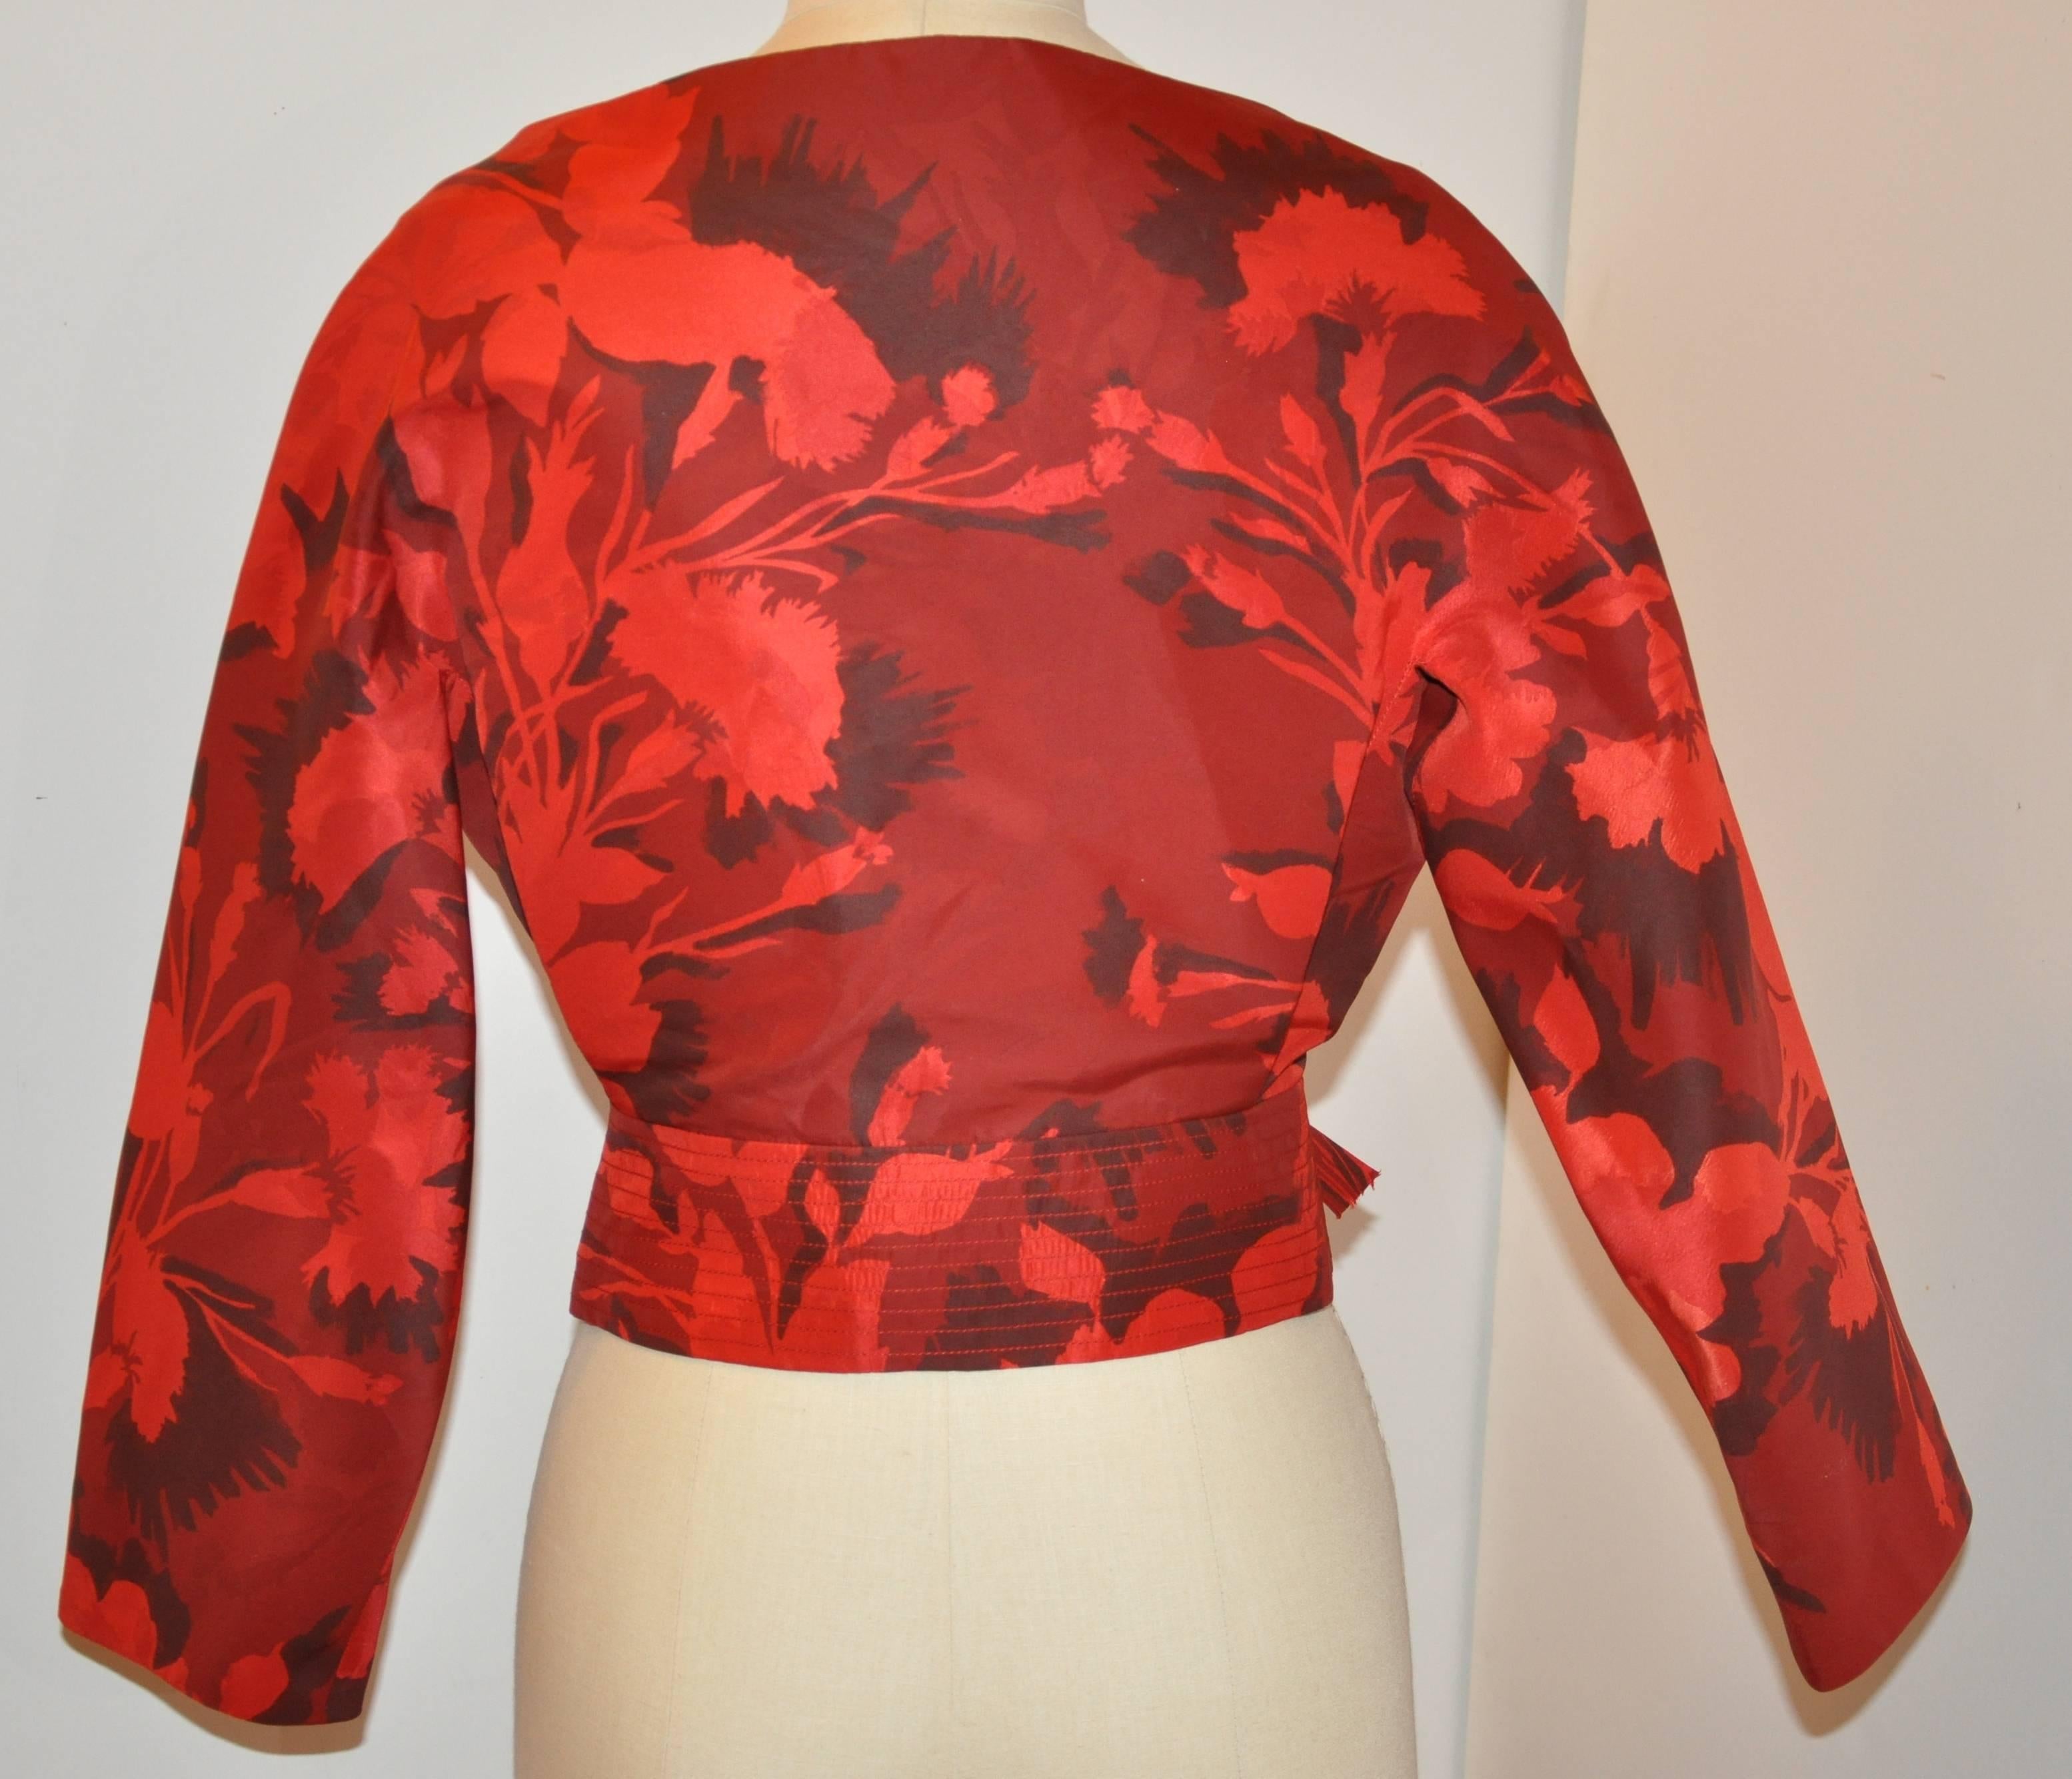 Carolina Herrera wonderfully elegant and timeless "Shades of Red" floral off-the-shoulder cocktail jacket is accented with lovely hand-made bows in front covering the four eyelet-and-round buttons as well as two snaps closings. The